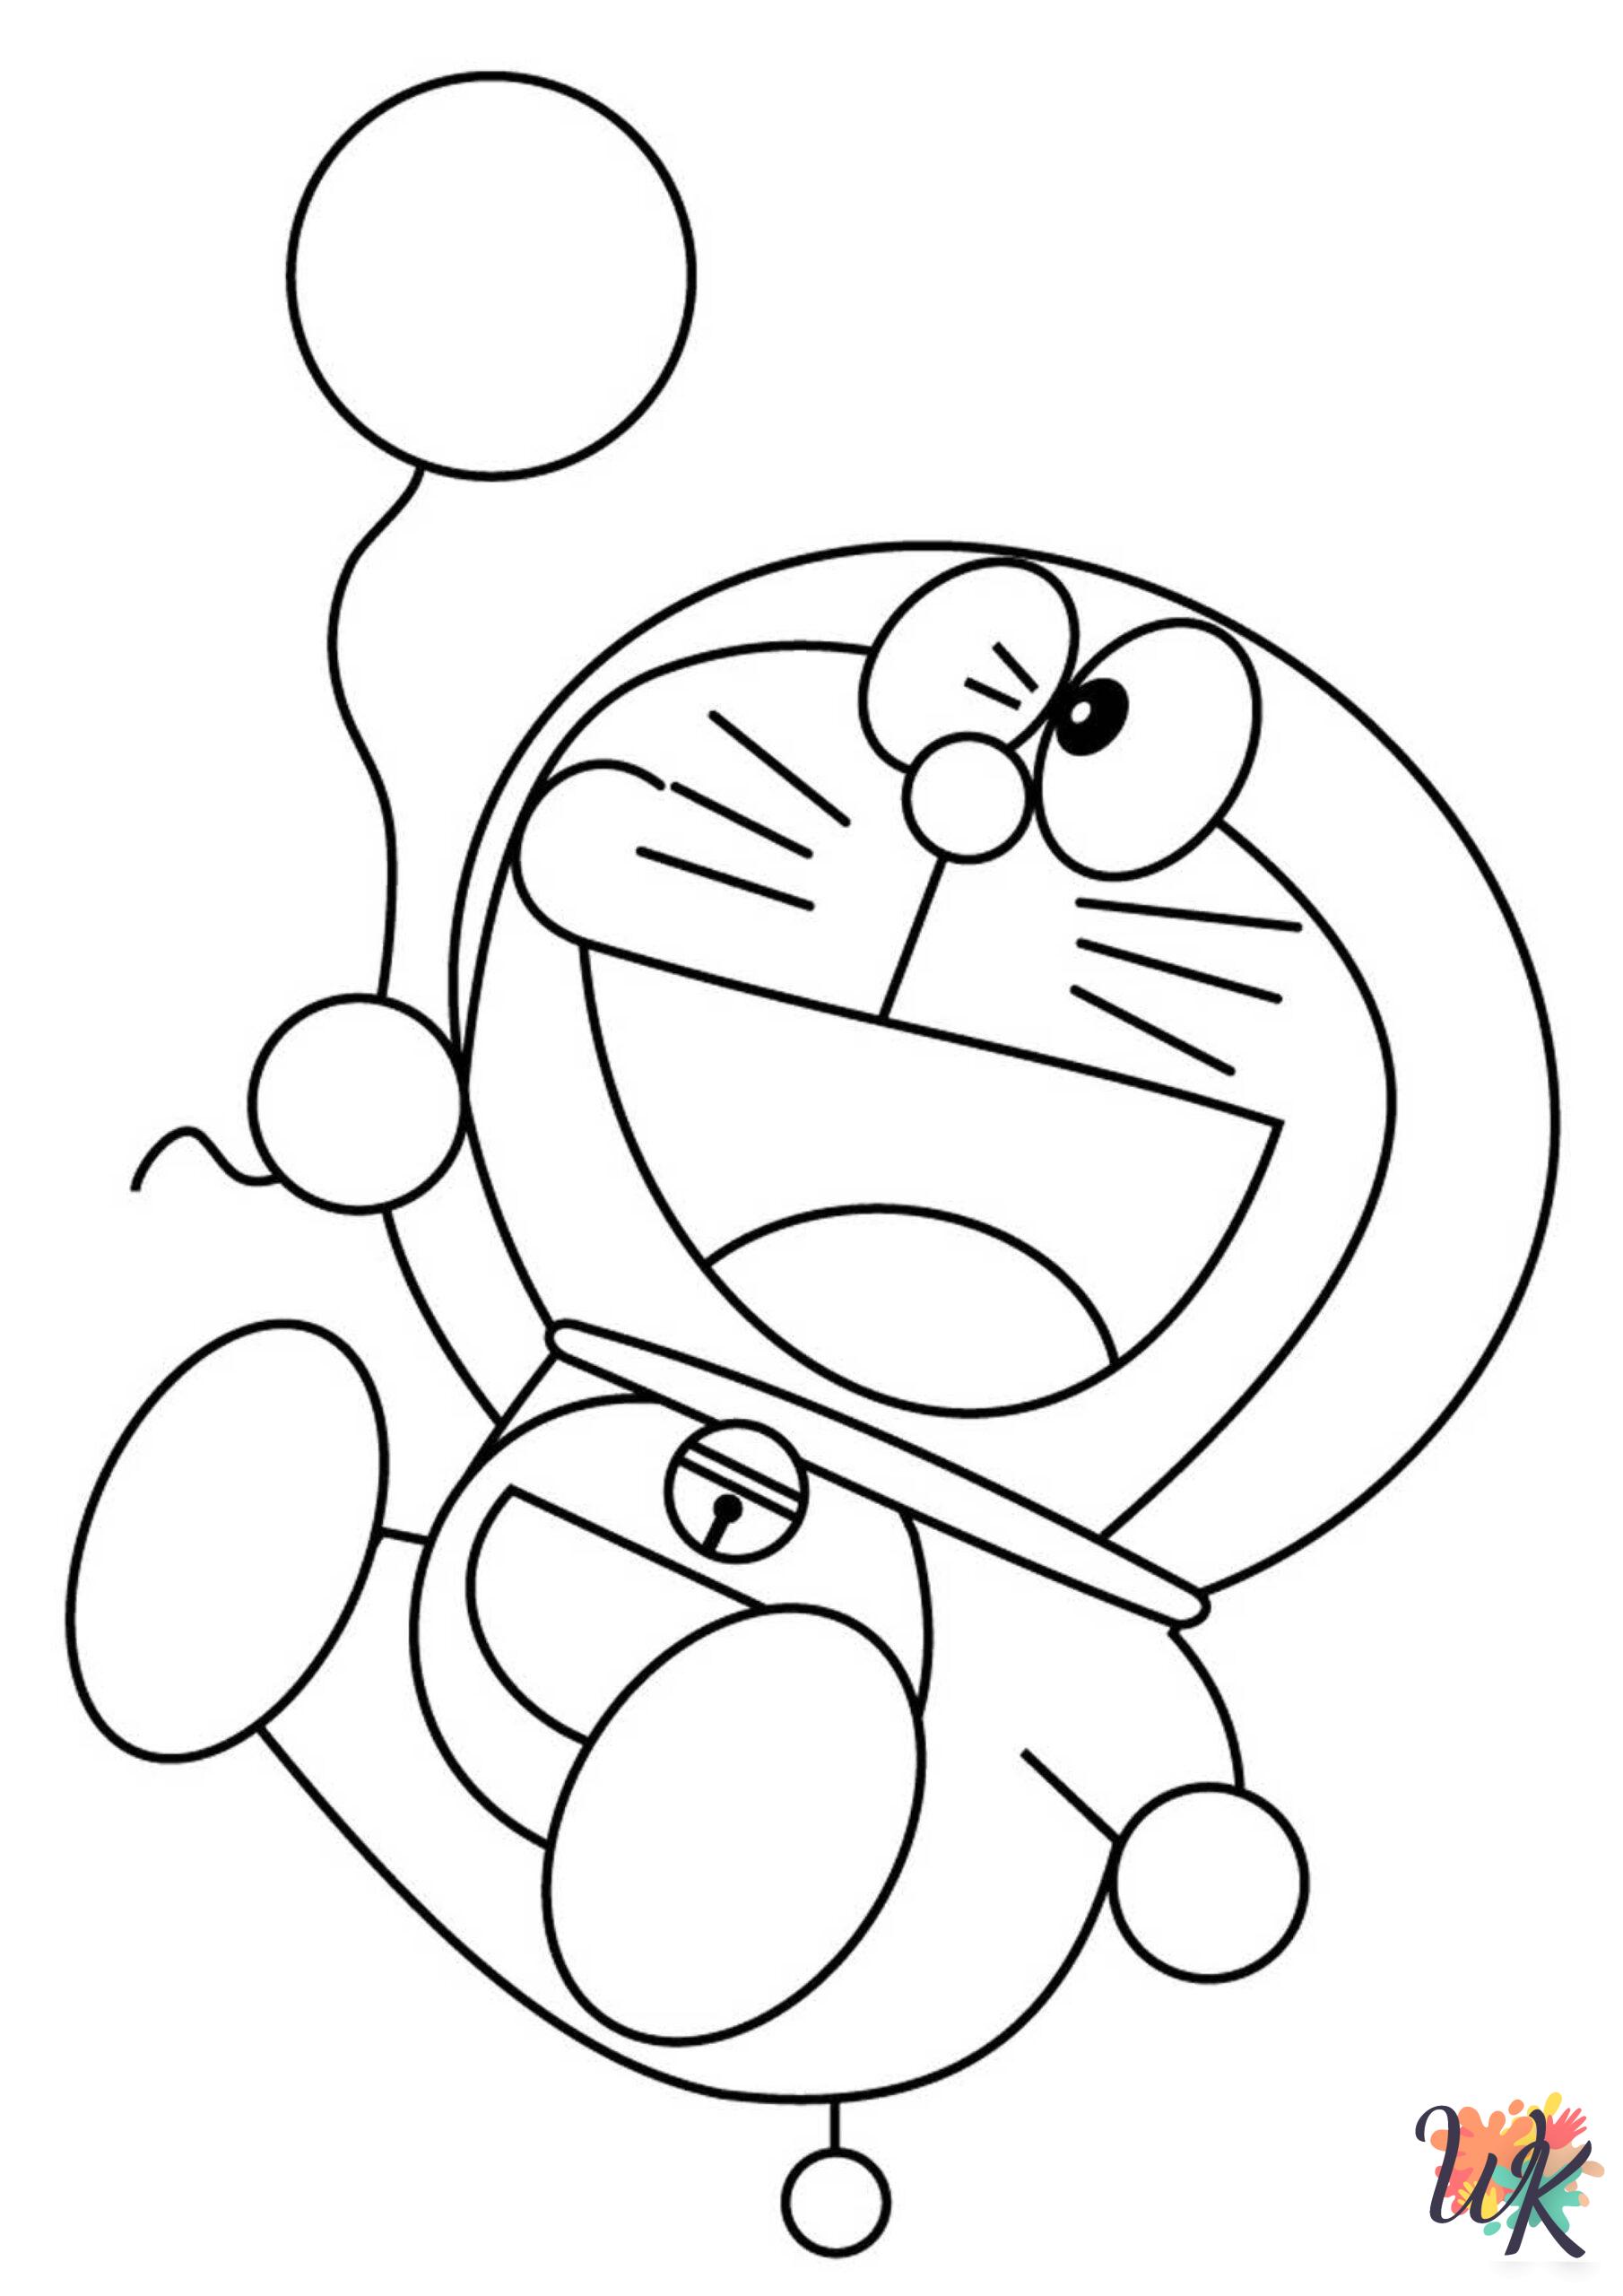 Doraemon coloring pages for adults pdf